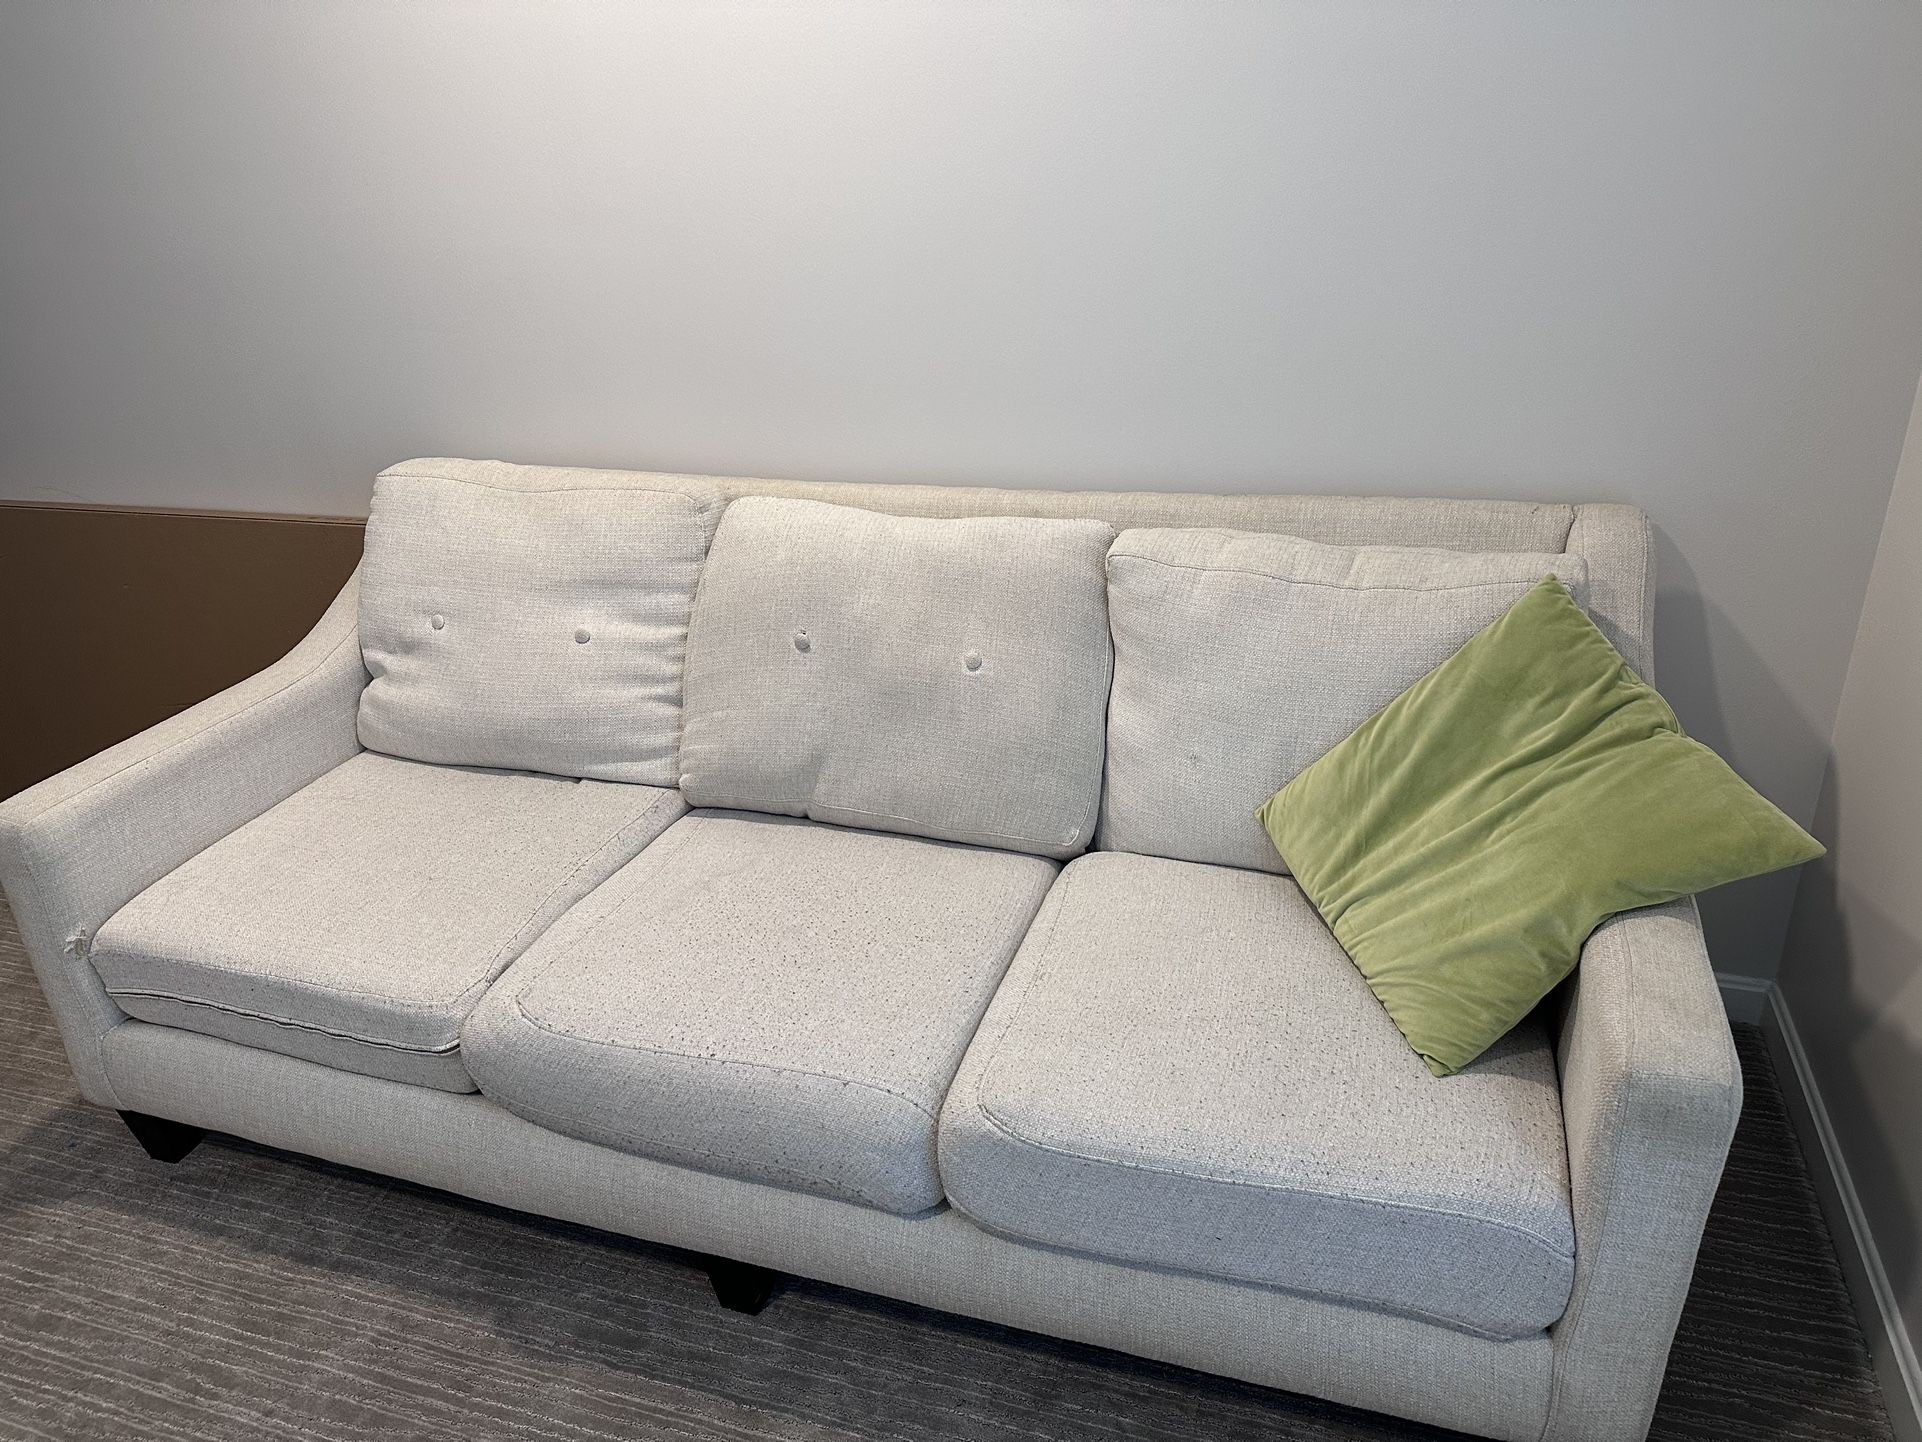 Couch For Sale -Free